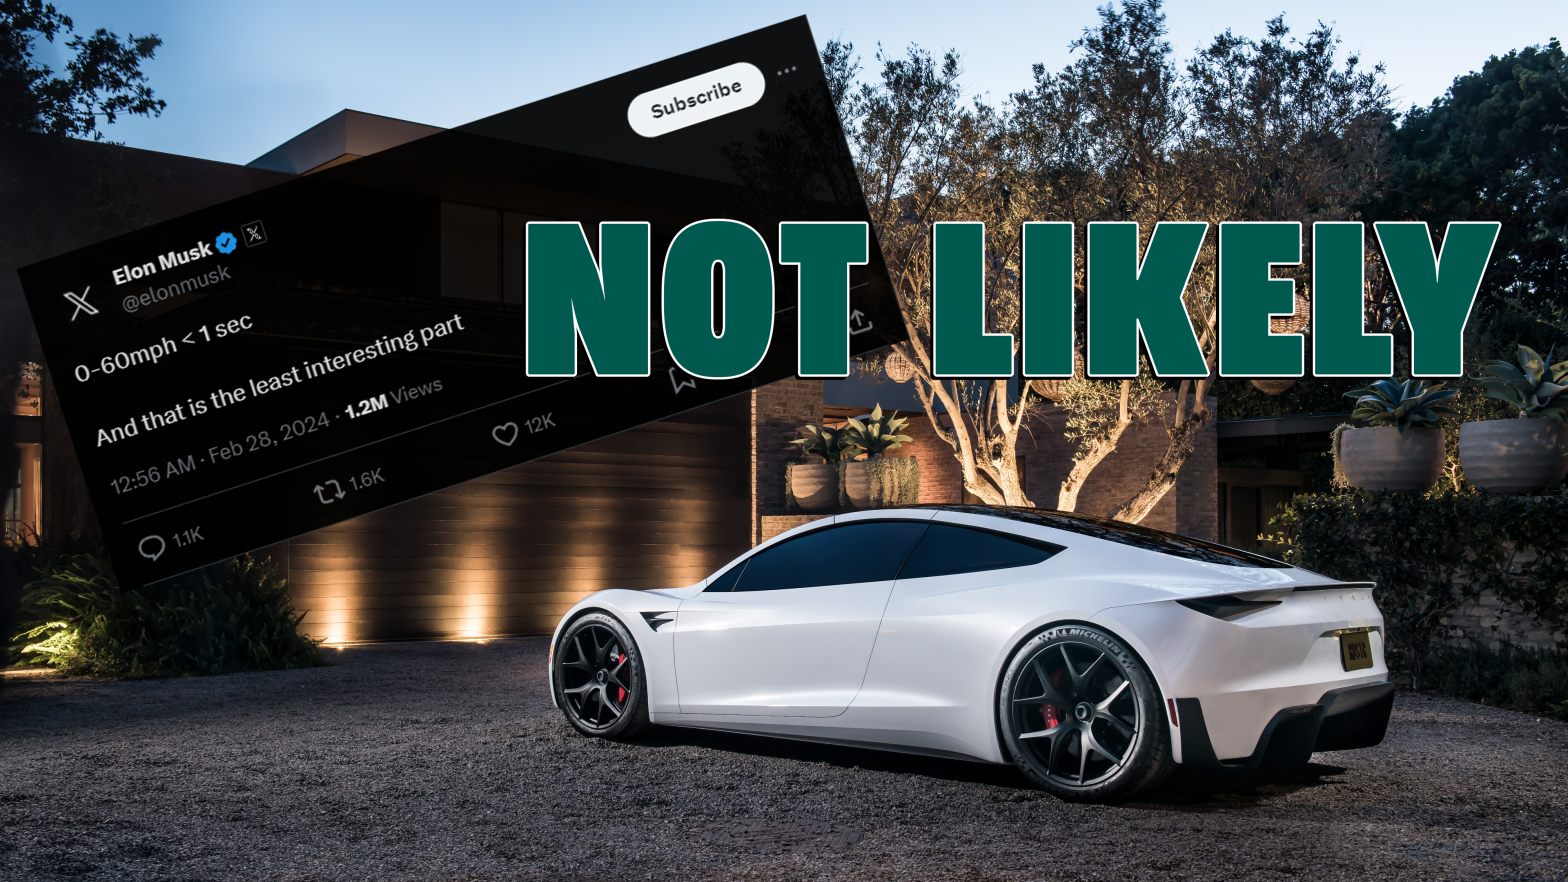 No, the Tesla Roadster Probably Won’t Hit 60 Mph in Under 1 Second